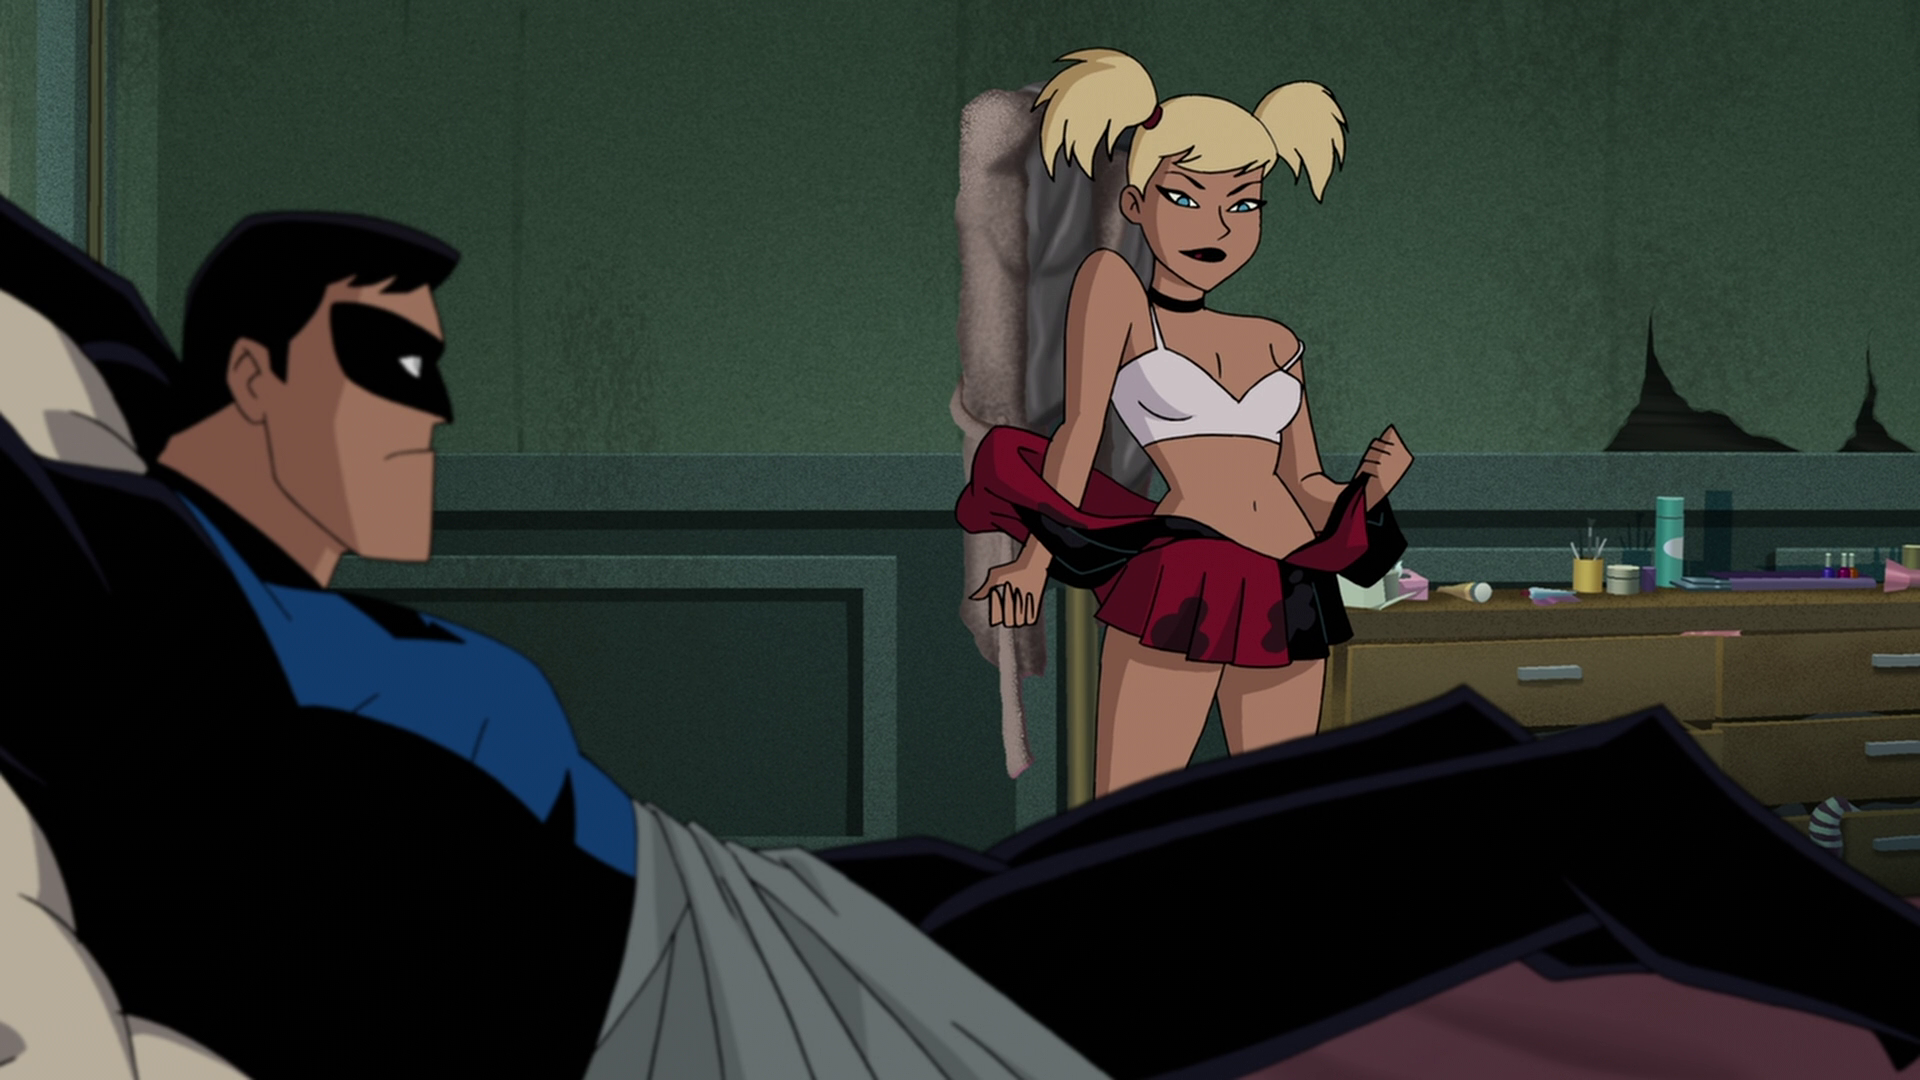 Continue below for an assortment of screengrabs from the Batman and Harley Quinn...